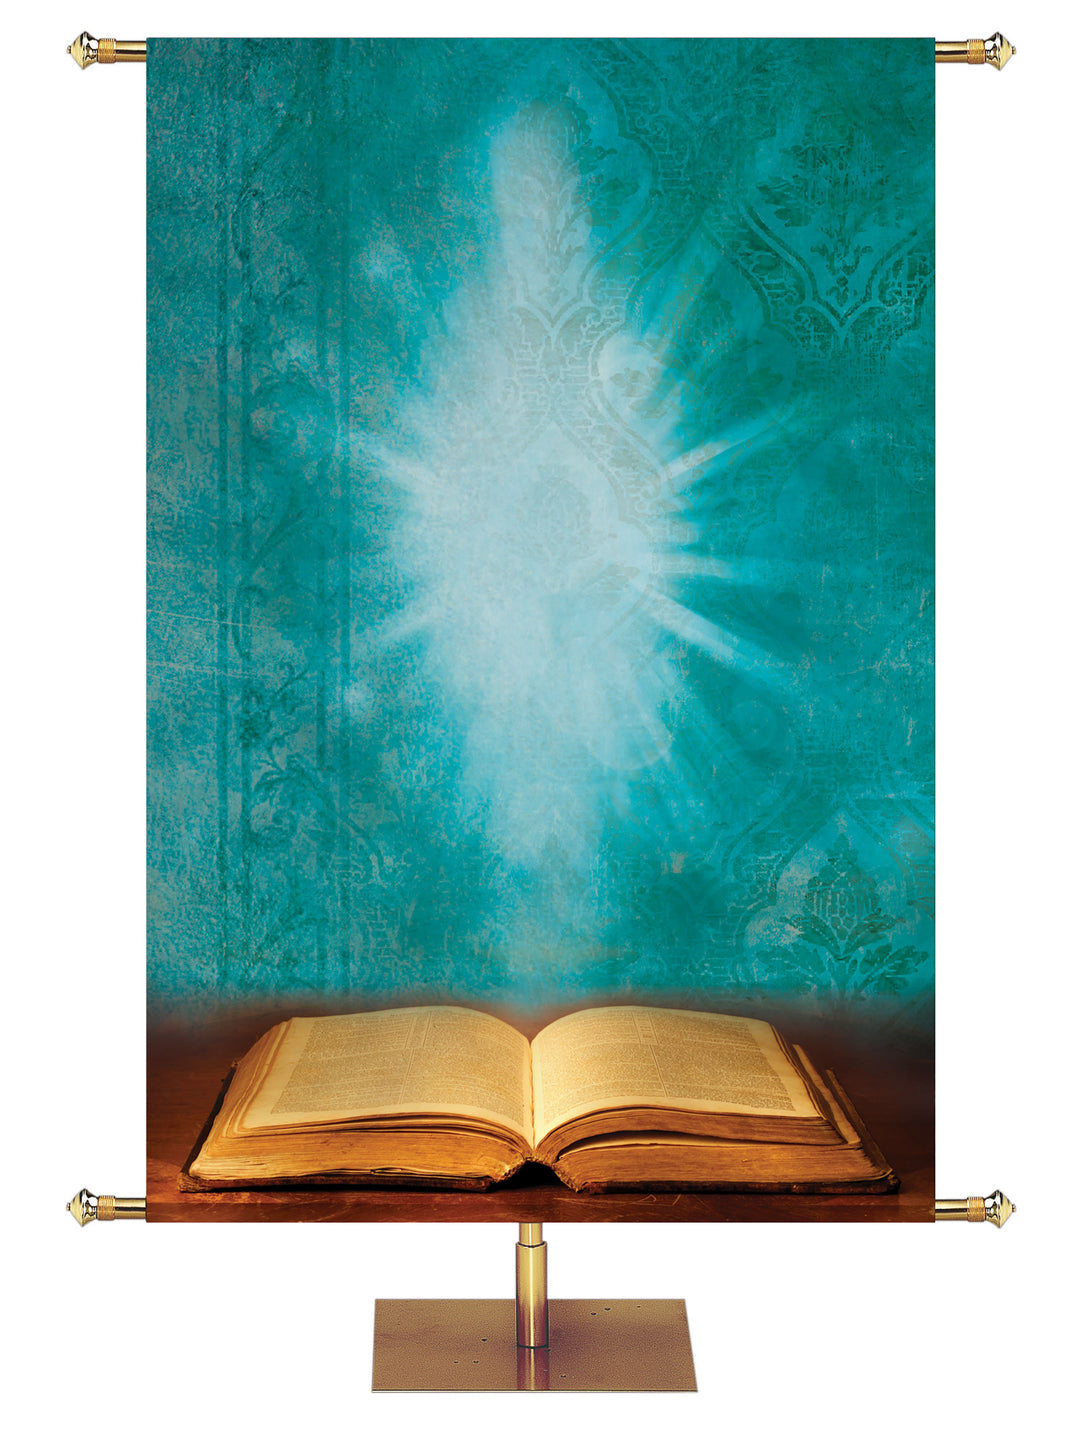 Custom Scriptures for Life Banner in 6 Color Options - Custom Year Round Banners - PraiseBanners